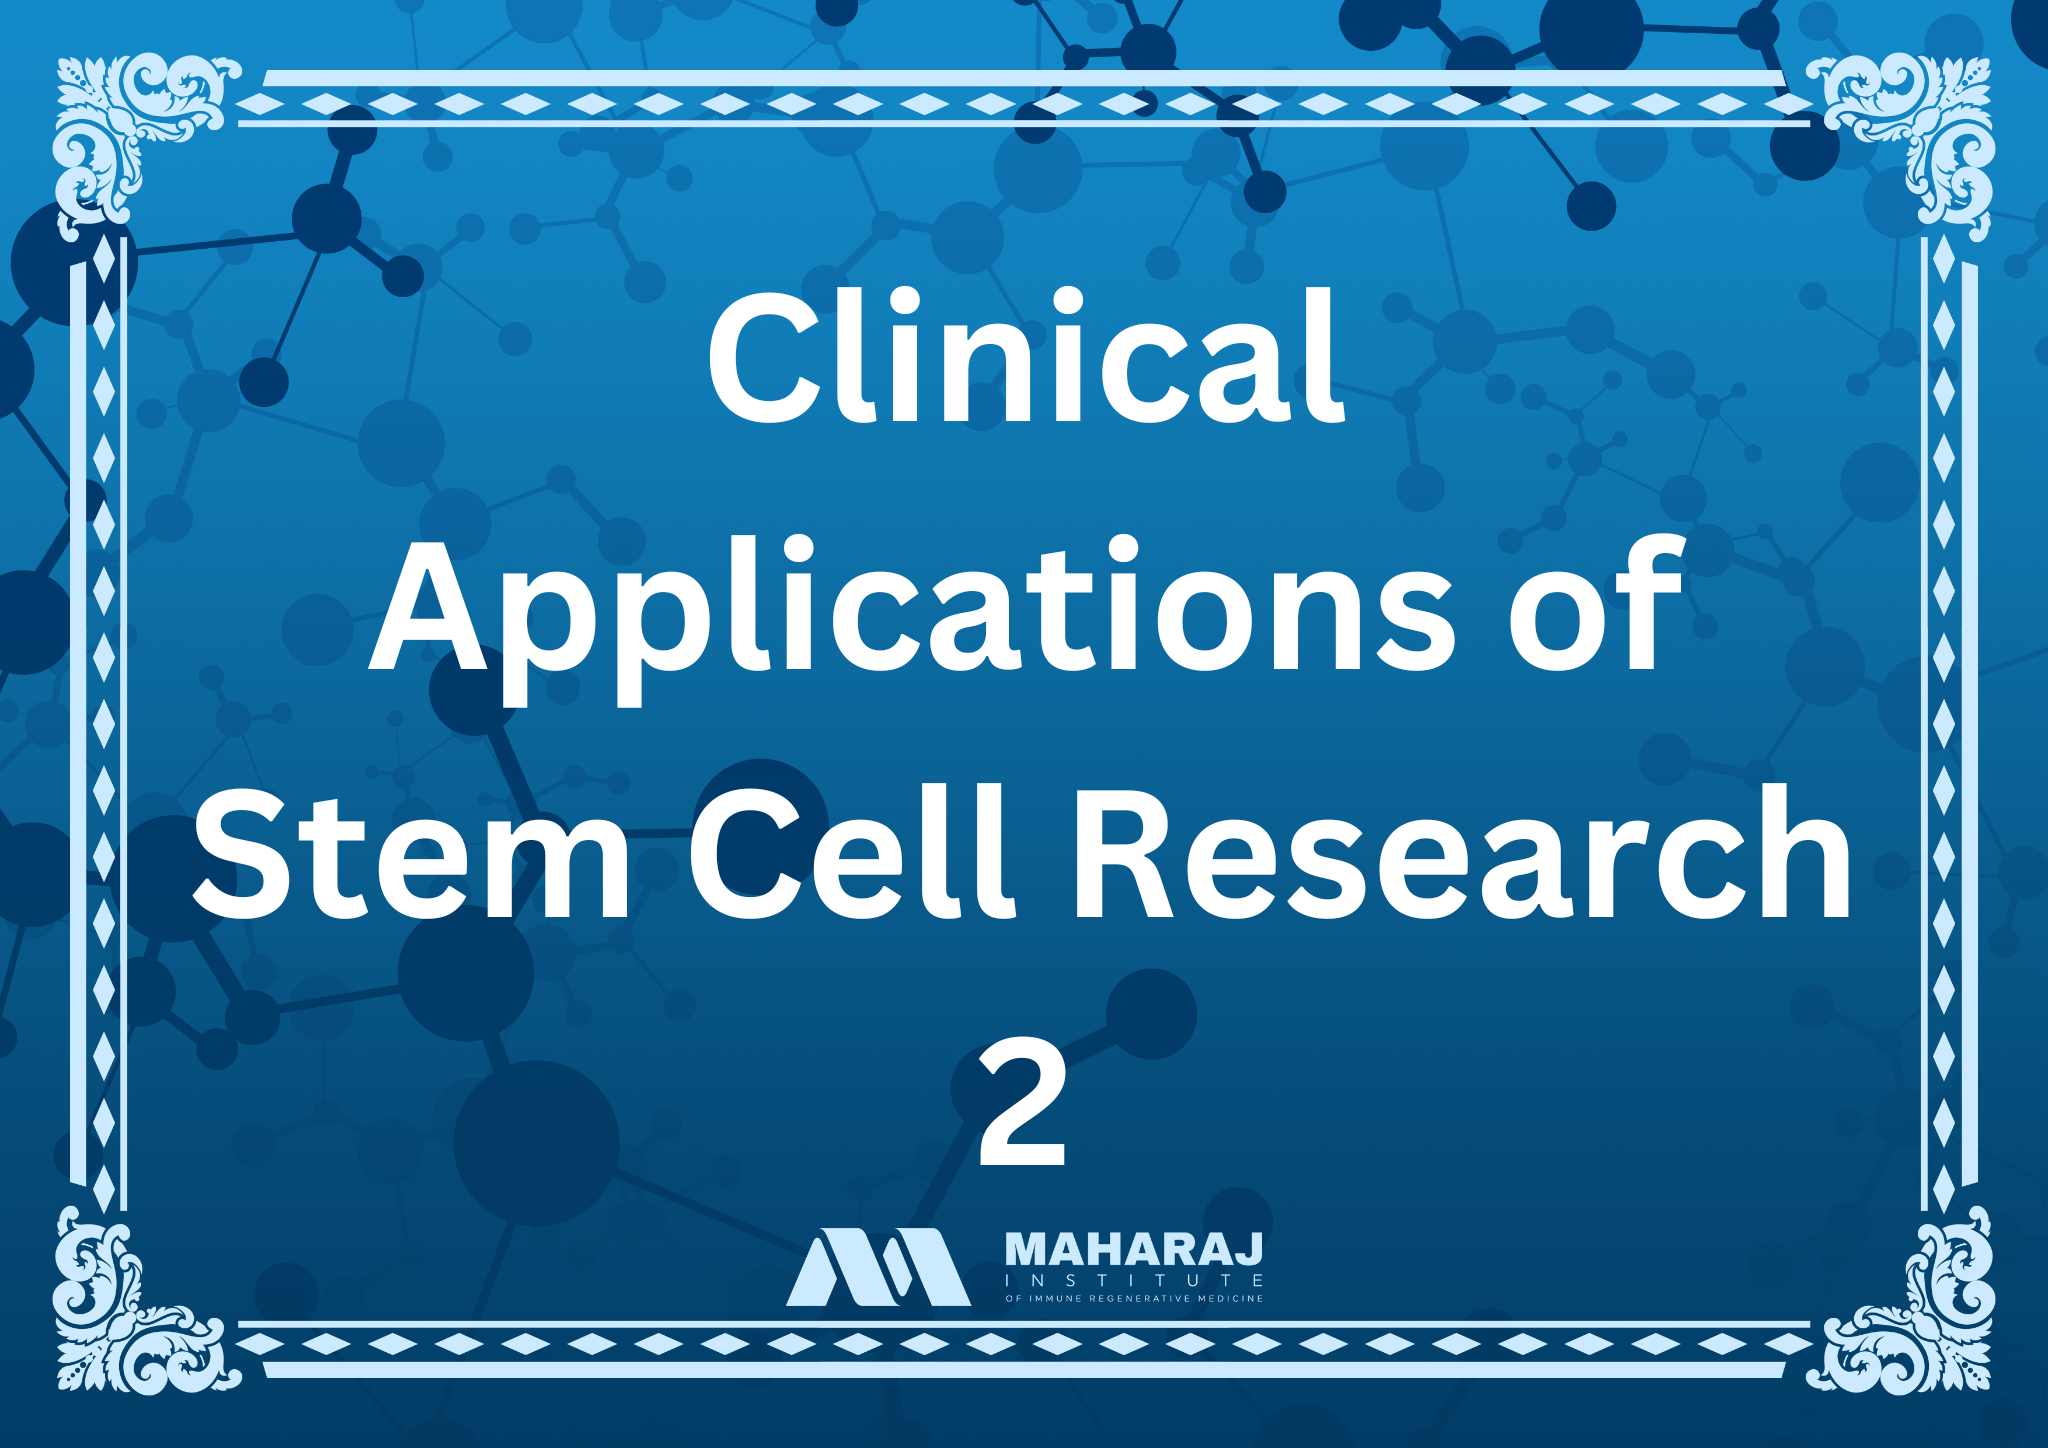 Clinical Applications of Stem Cell Research 2